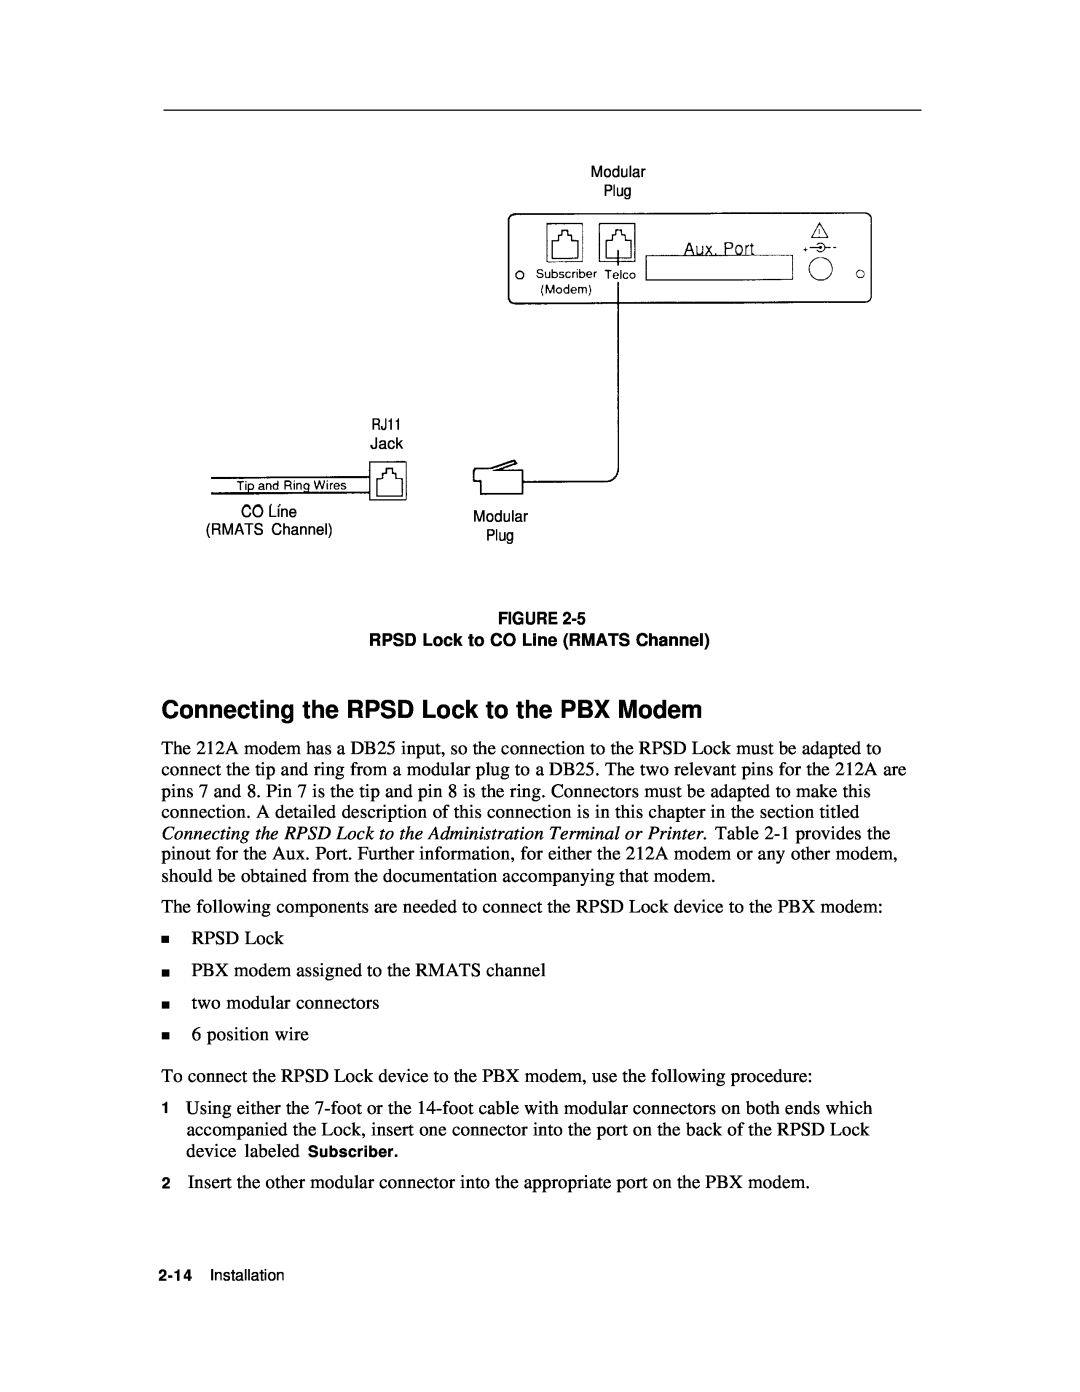 AT&T Remote Port Security Device user manual Connecting the RPSD Lock to the PBX Modem 